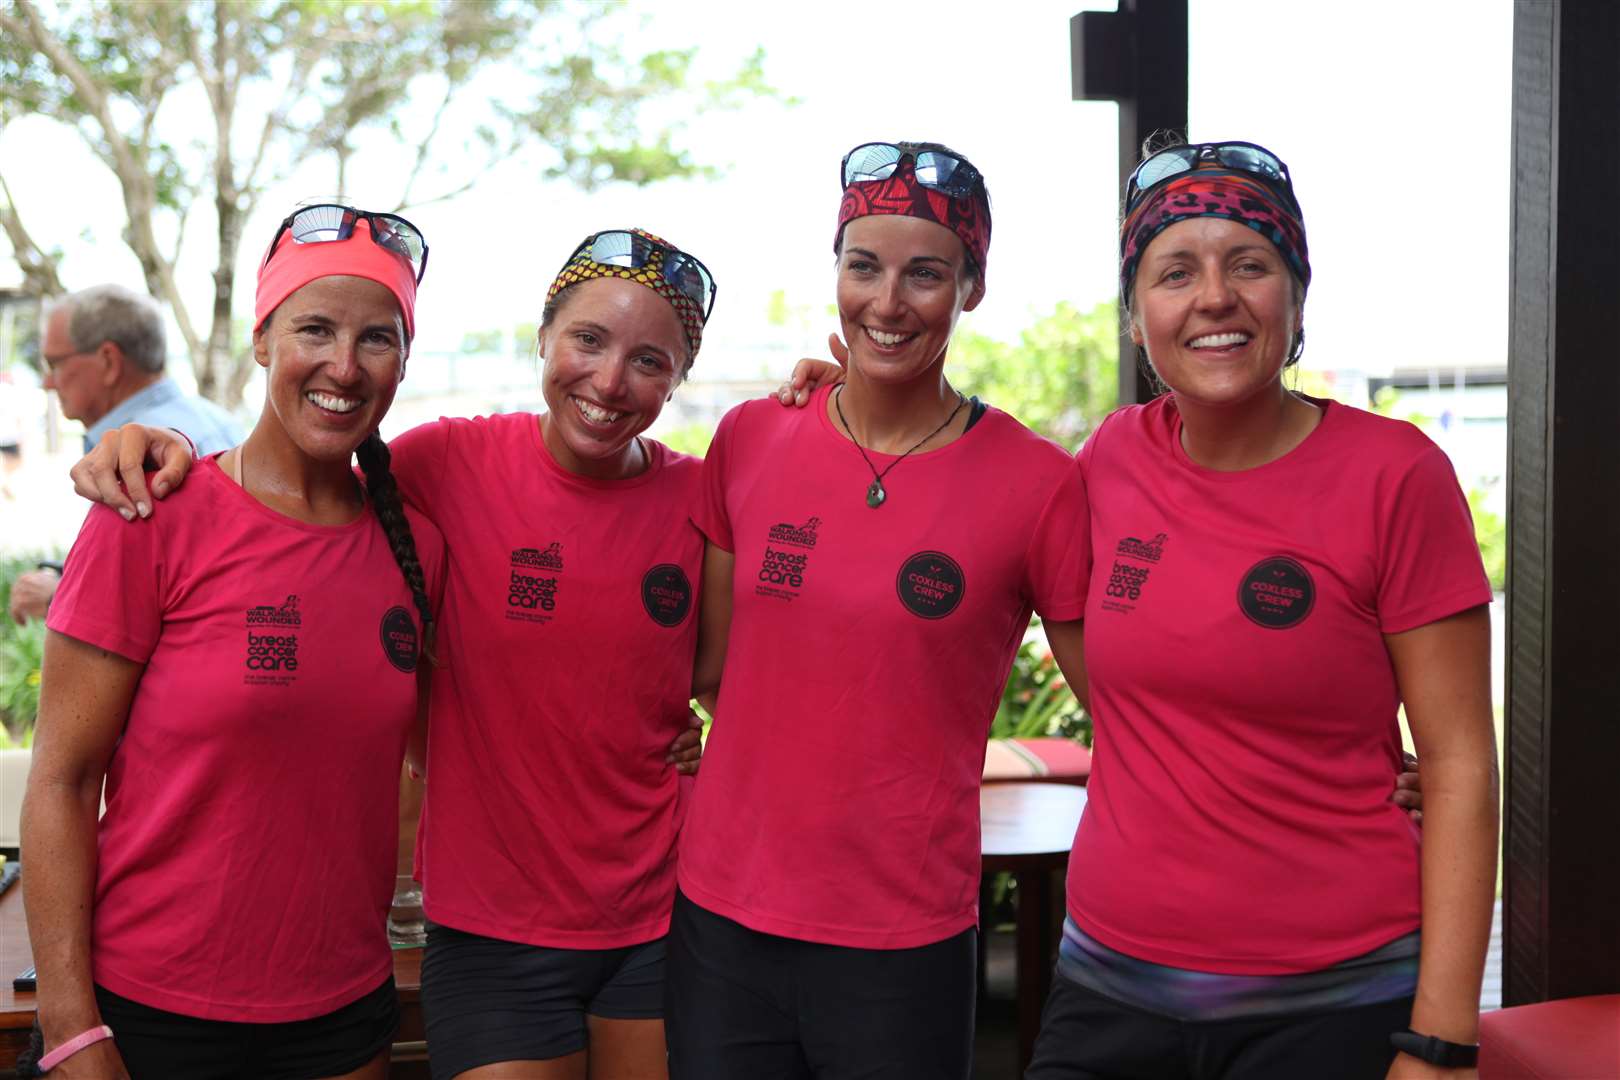 From left, Natalia Cohen, Emma Mitchell, Laura Penhaul and Meg Dyos of Coxless Crew